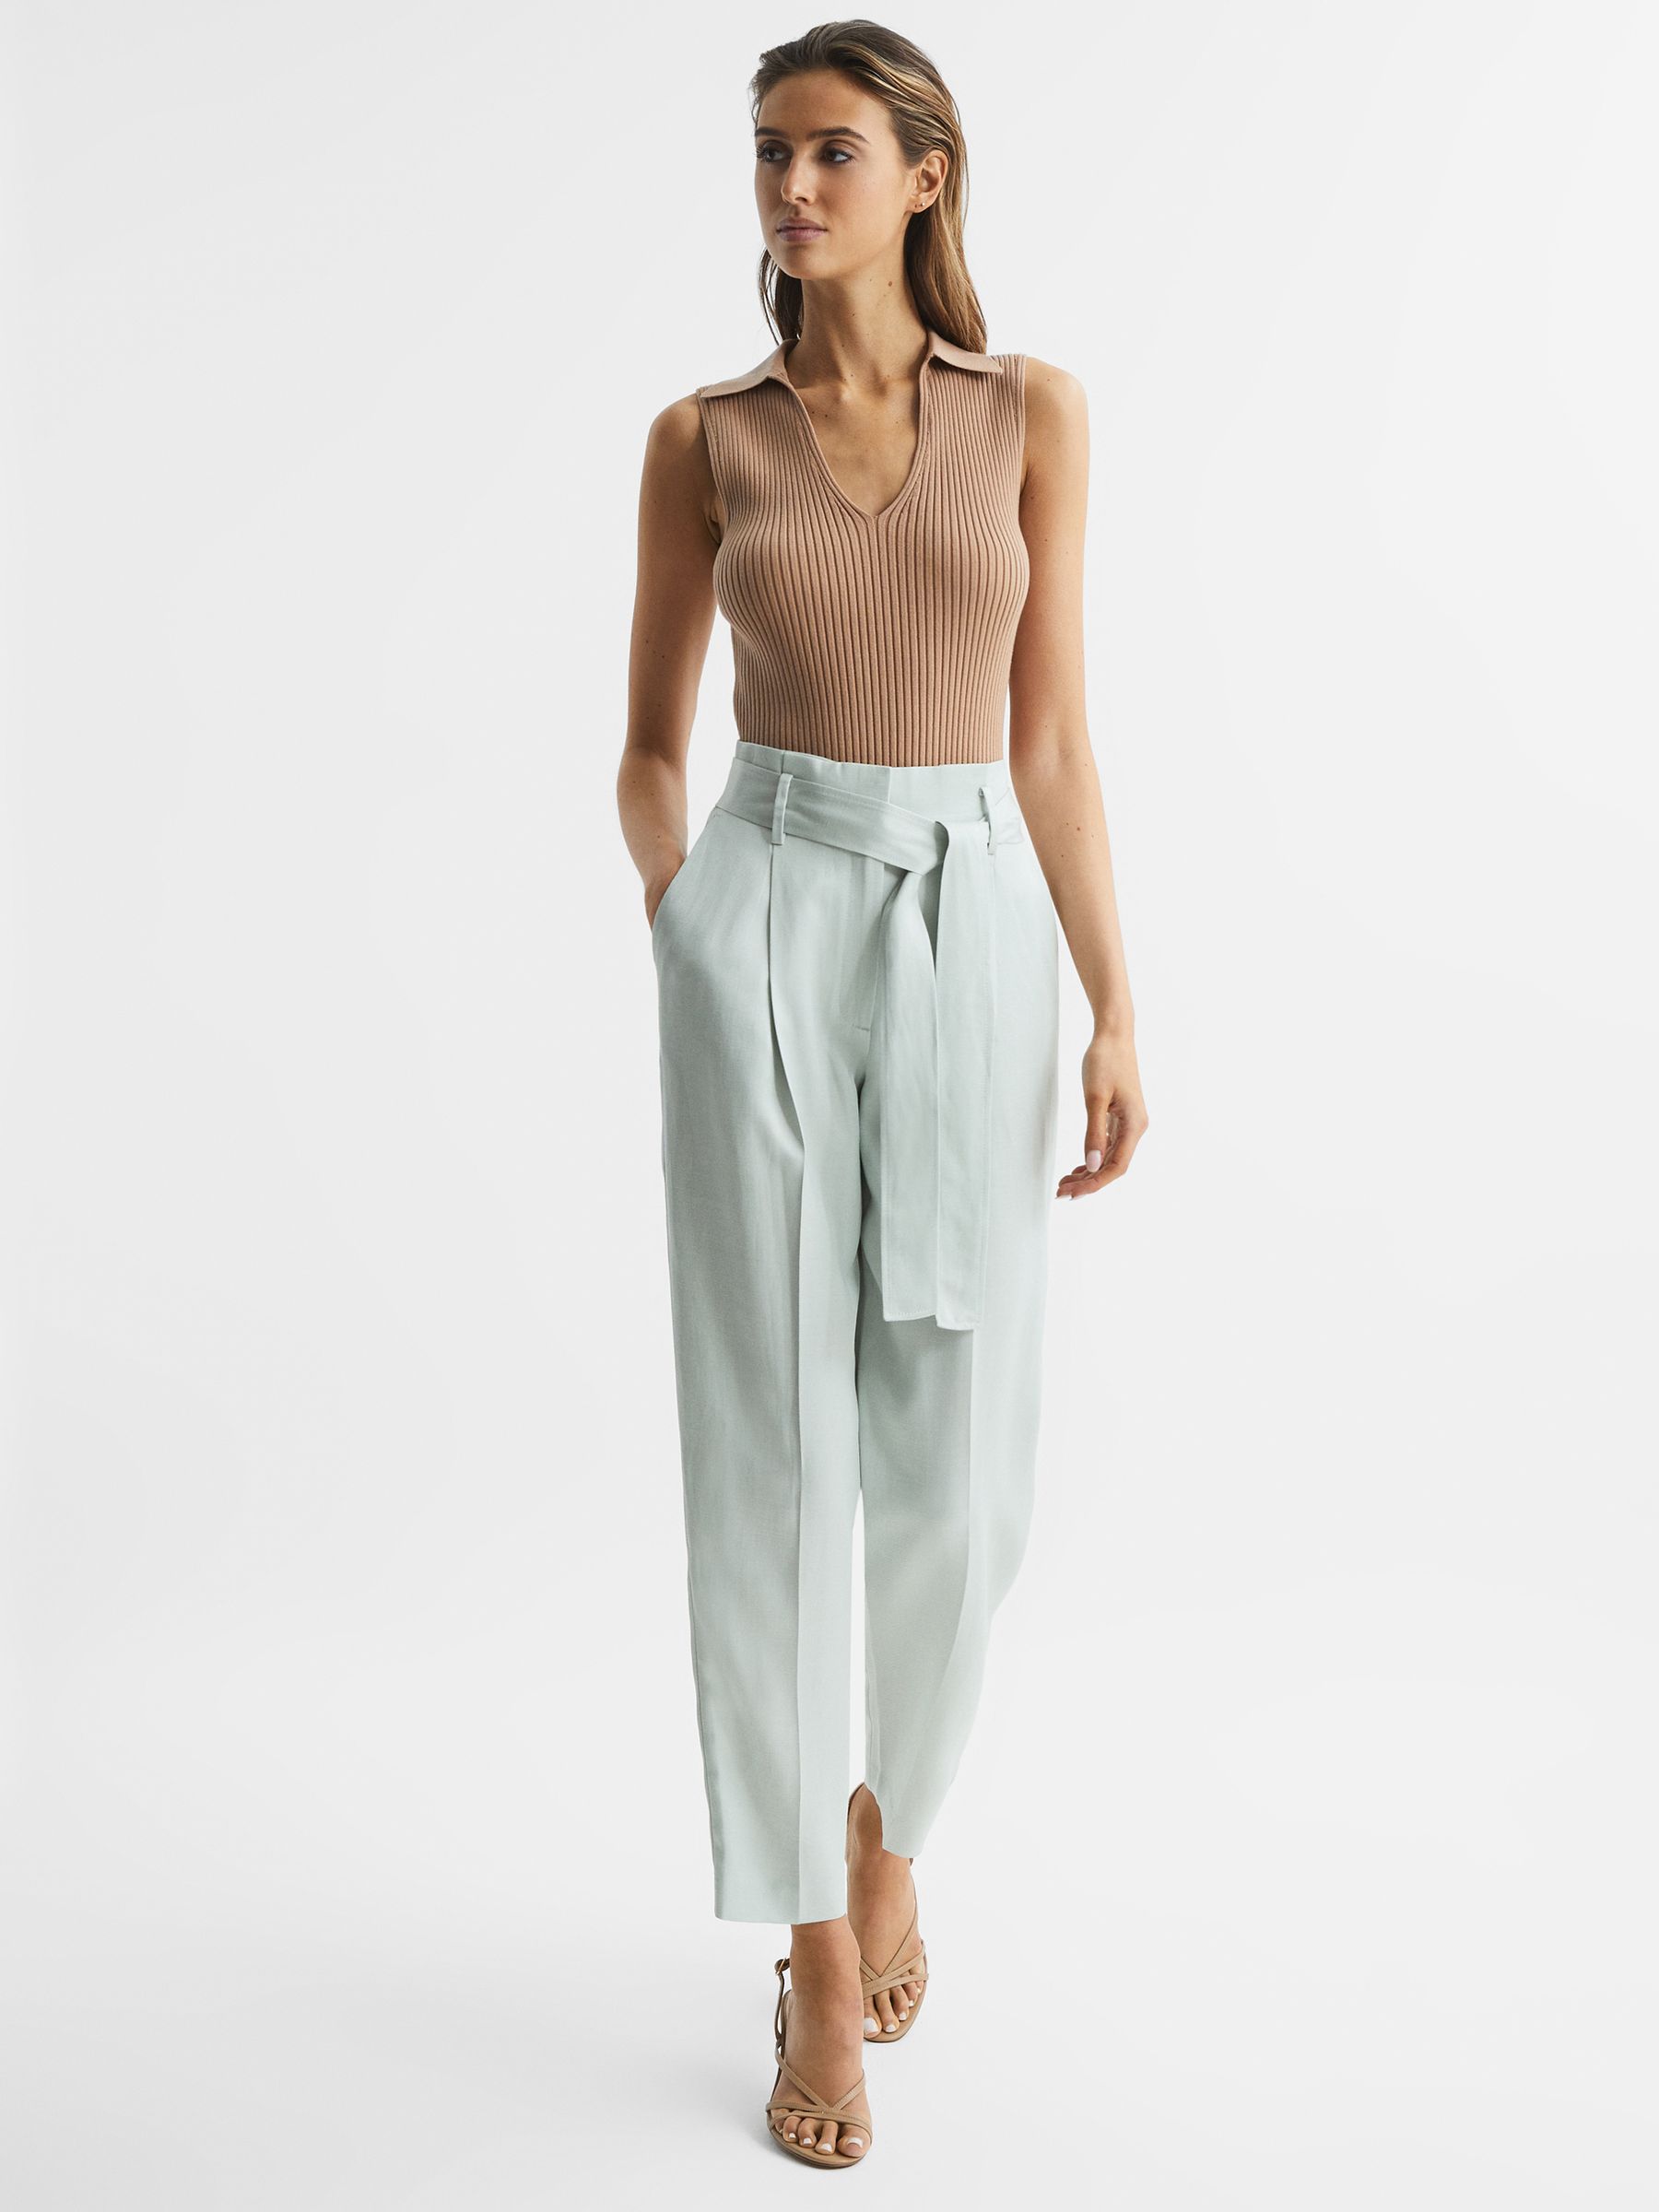 Reiss Mylie Tapered High Rise Trousers - REISS